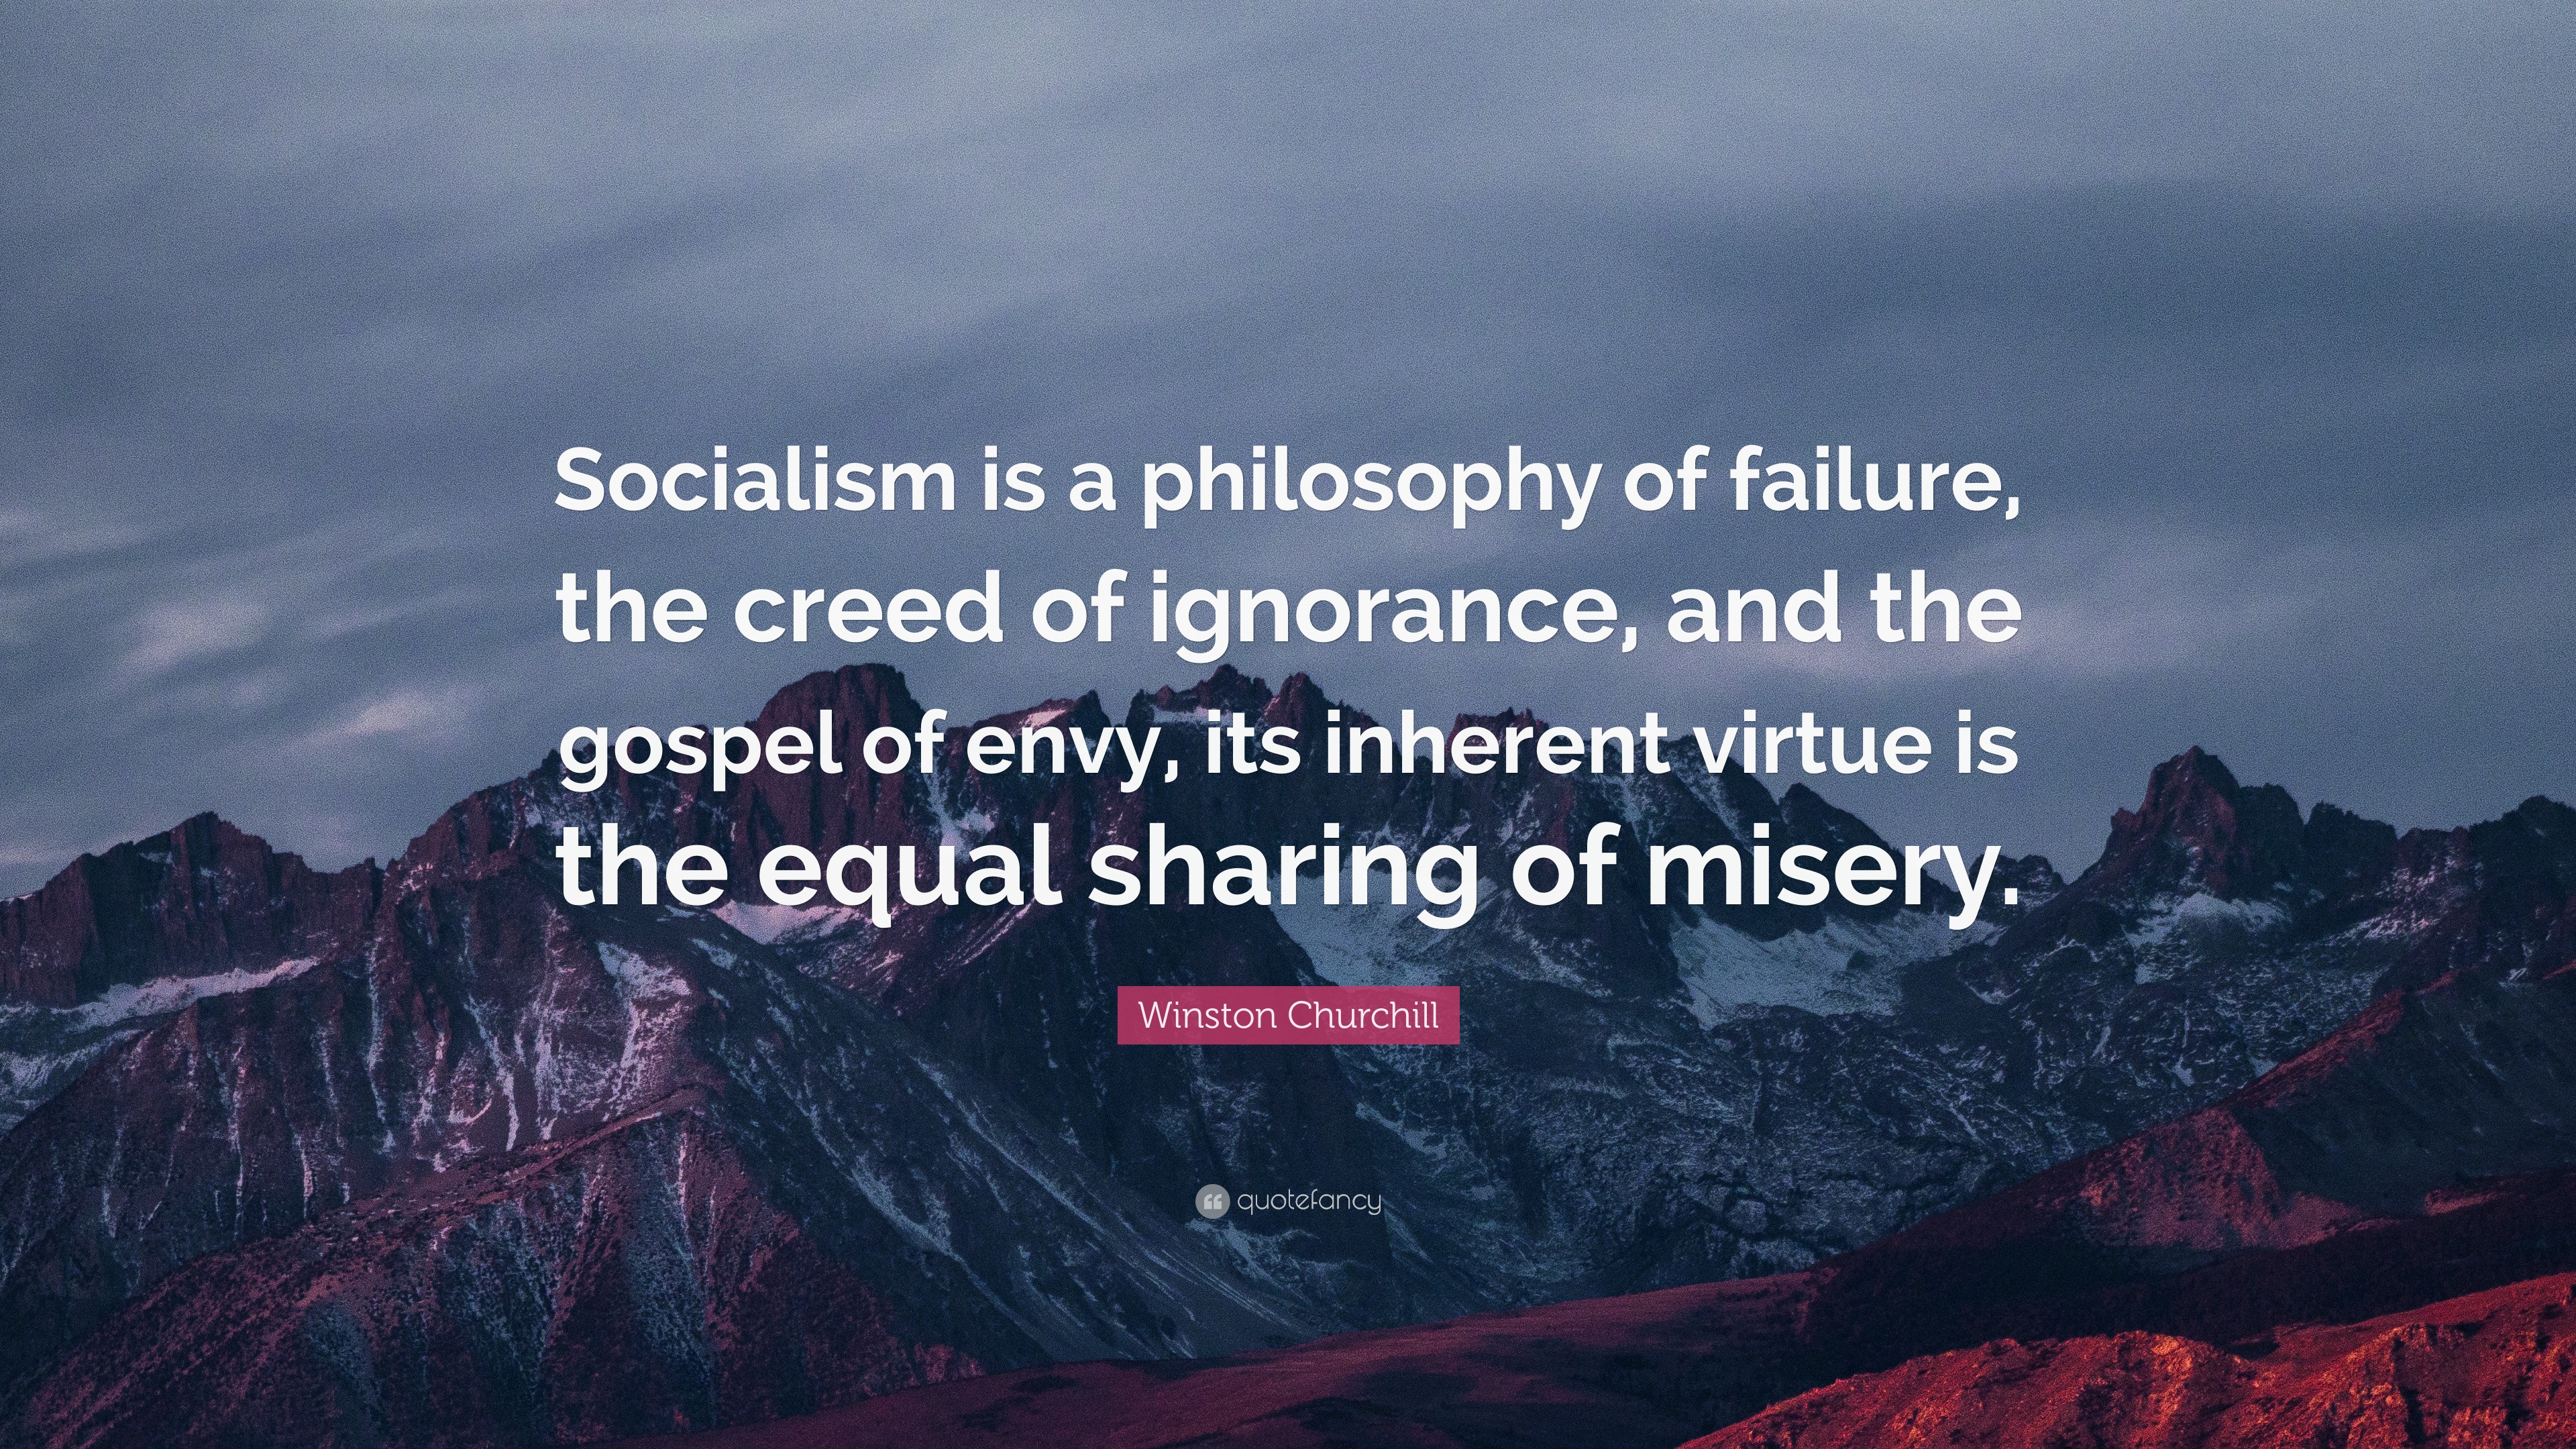 Winston Churchill Quote: “Socialism Is A Philosophy Of Failure, The Creed Of Ignorance, And The Gospel Of Envy, Its Inherent Virtue Is The Equal S...”